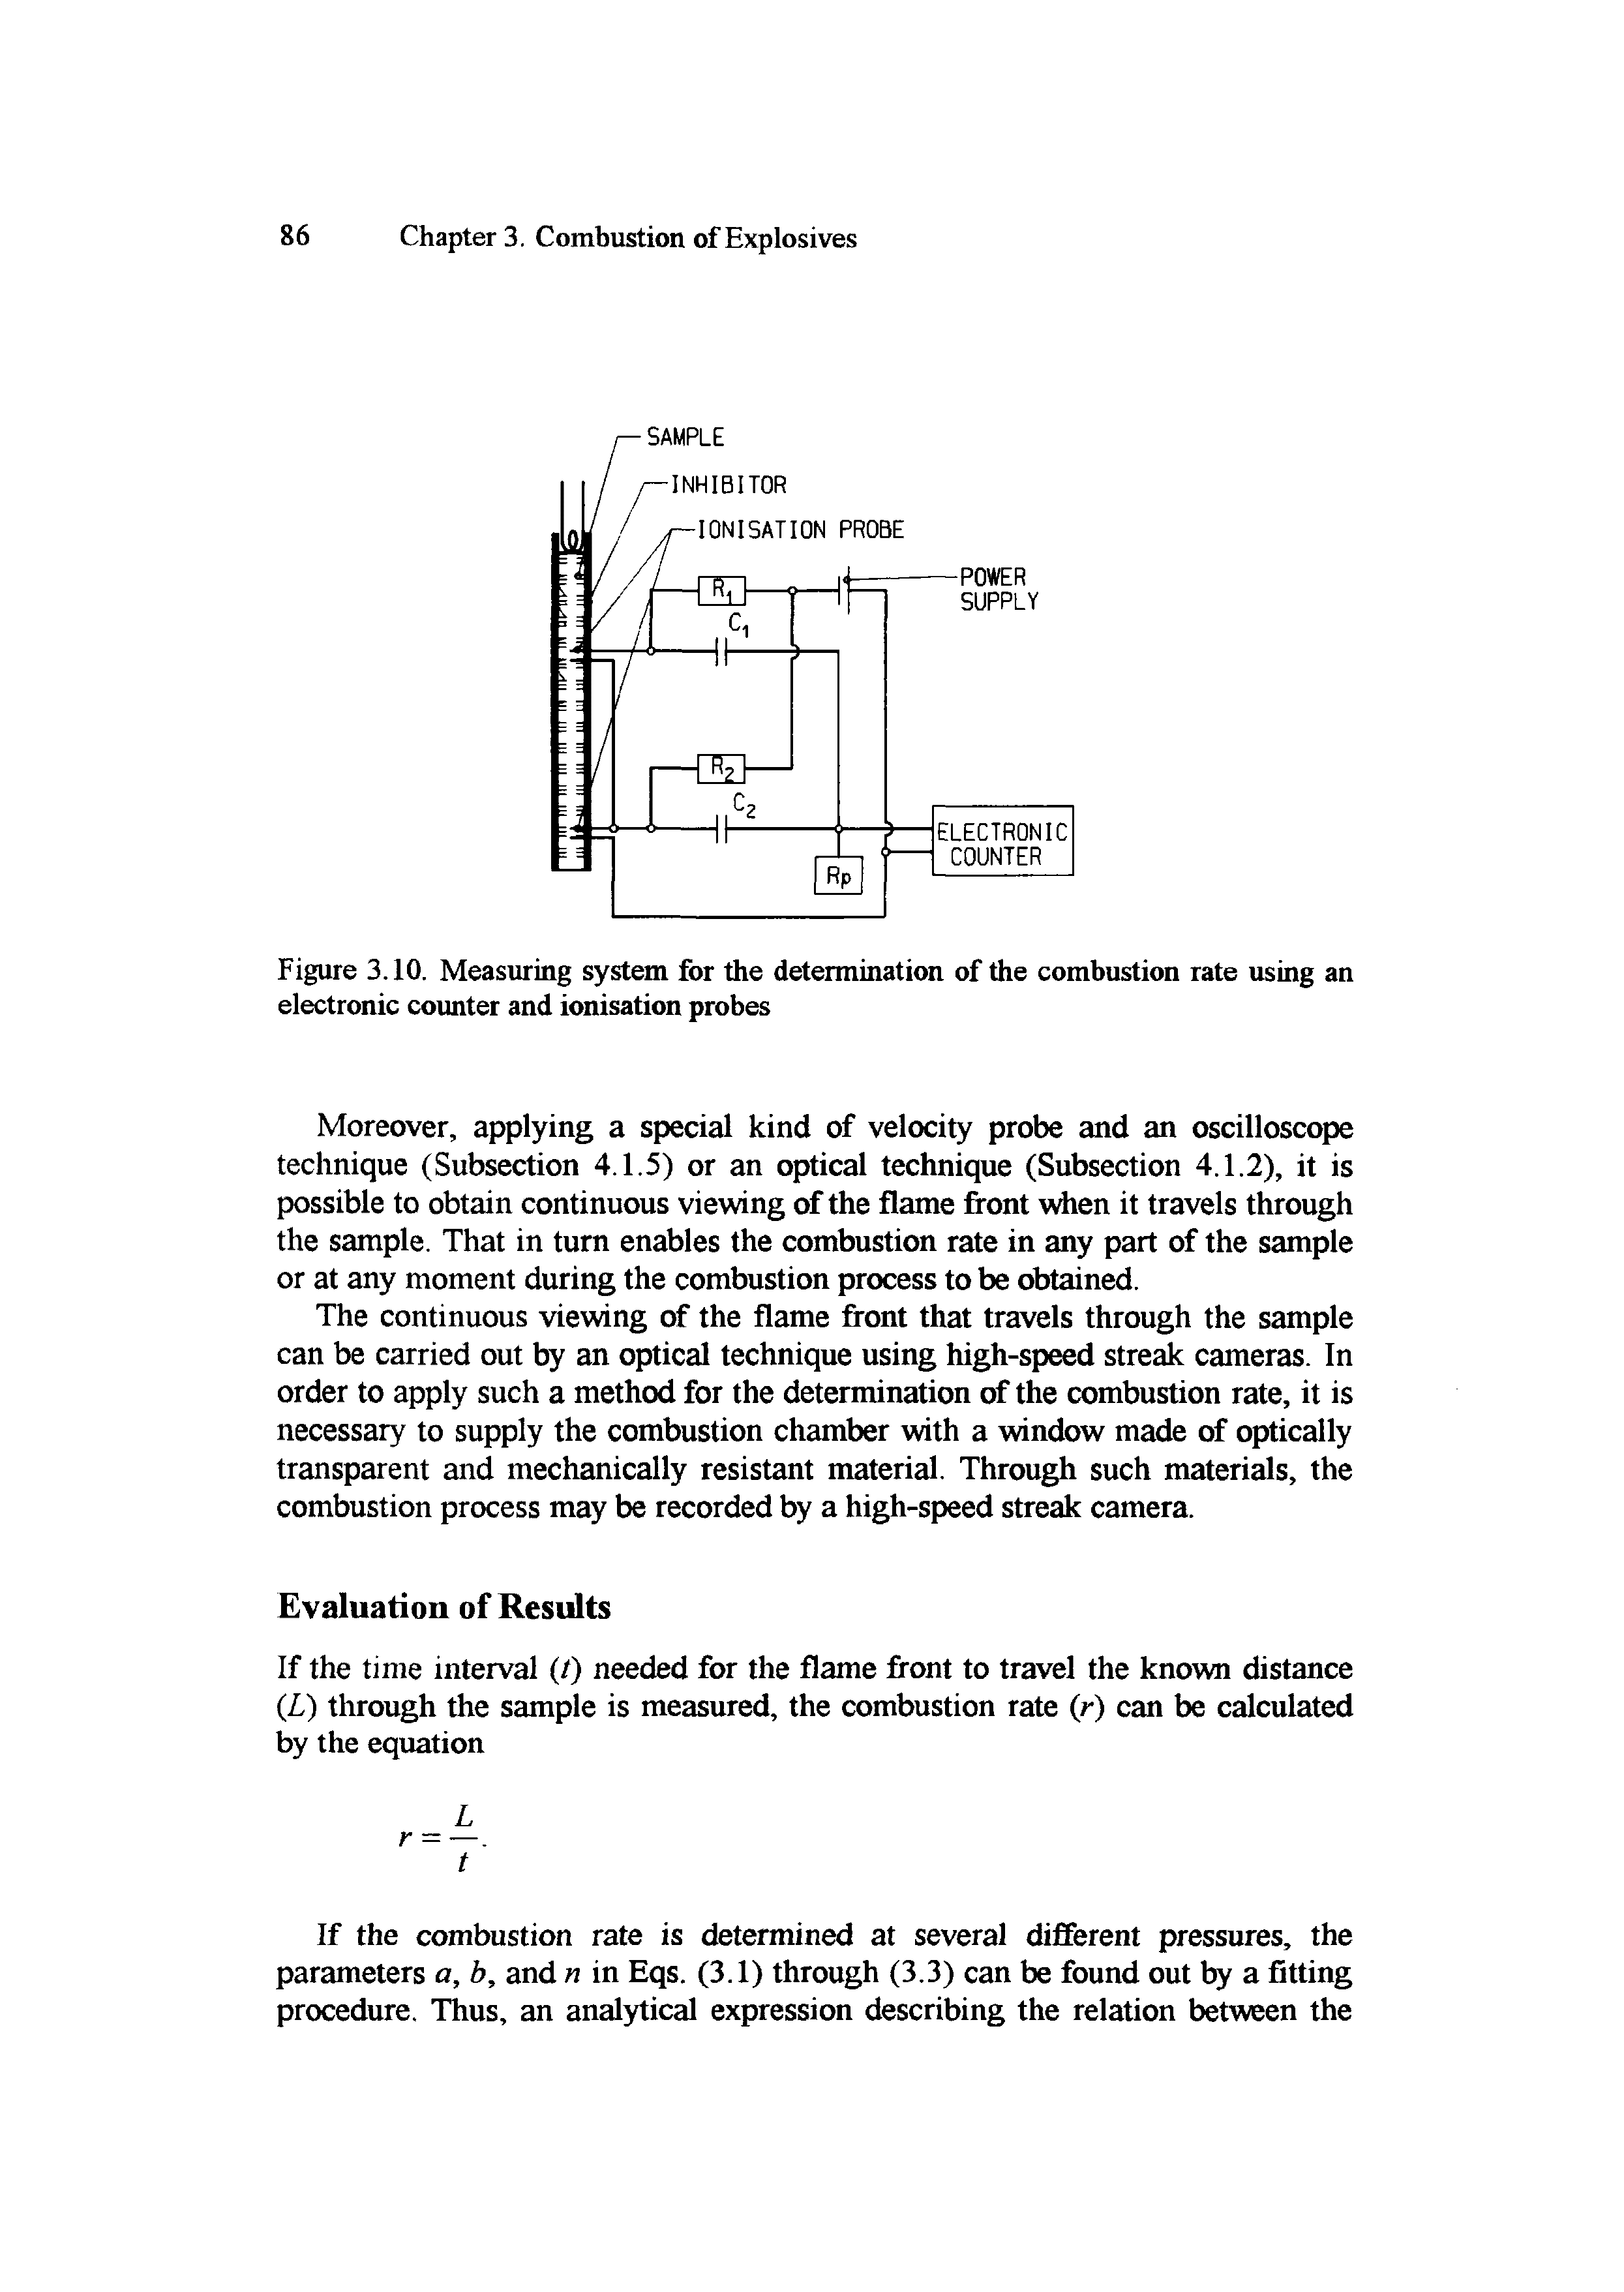 Figure 3.10. Measuring system for the determination of the combustion rate using an electronic counter and ionisation probes...